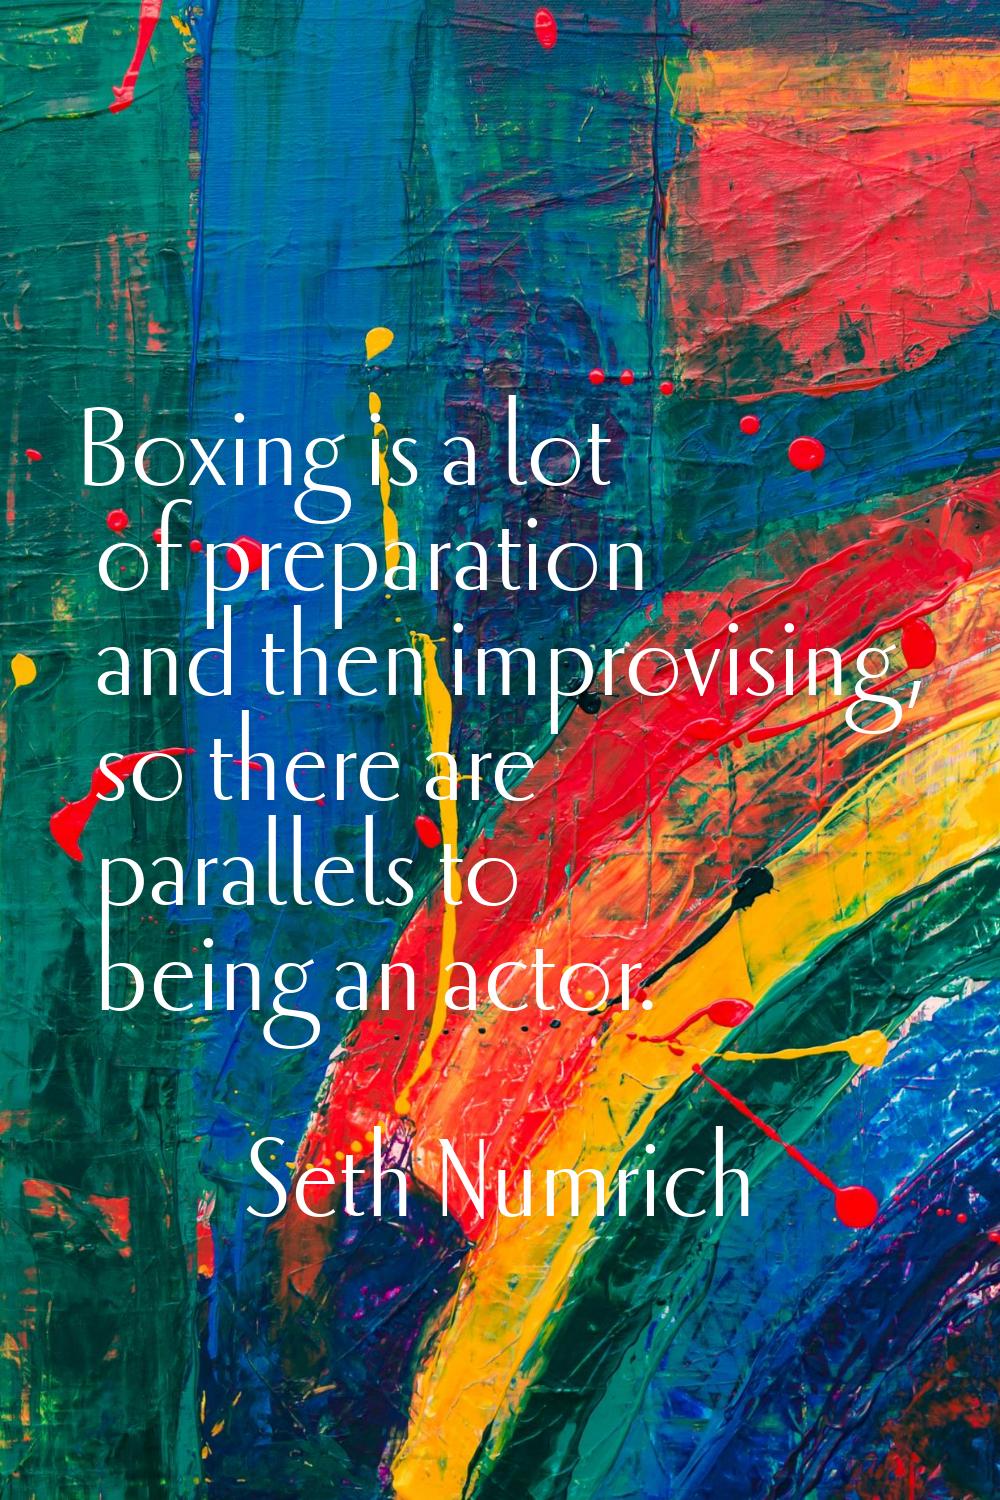 Boxing is a lot of preparation and then improvising, so there are parallels to being an actor.